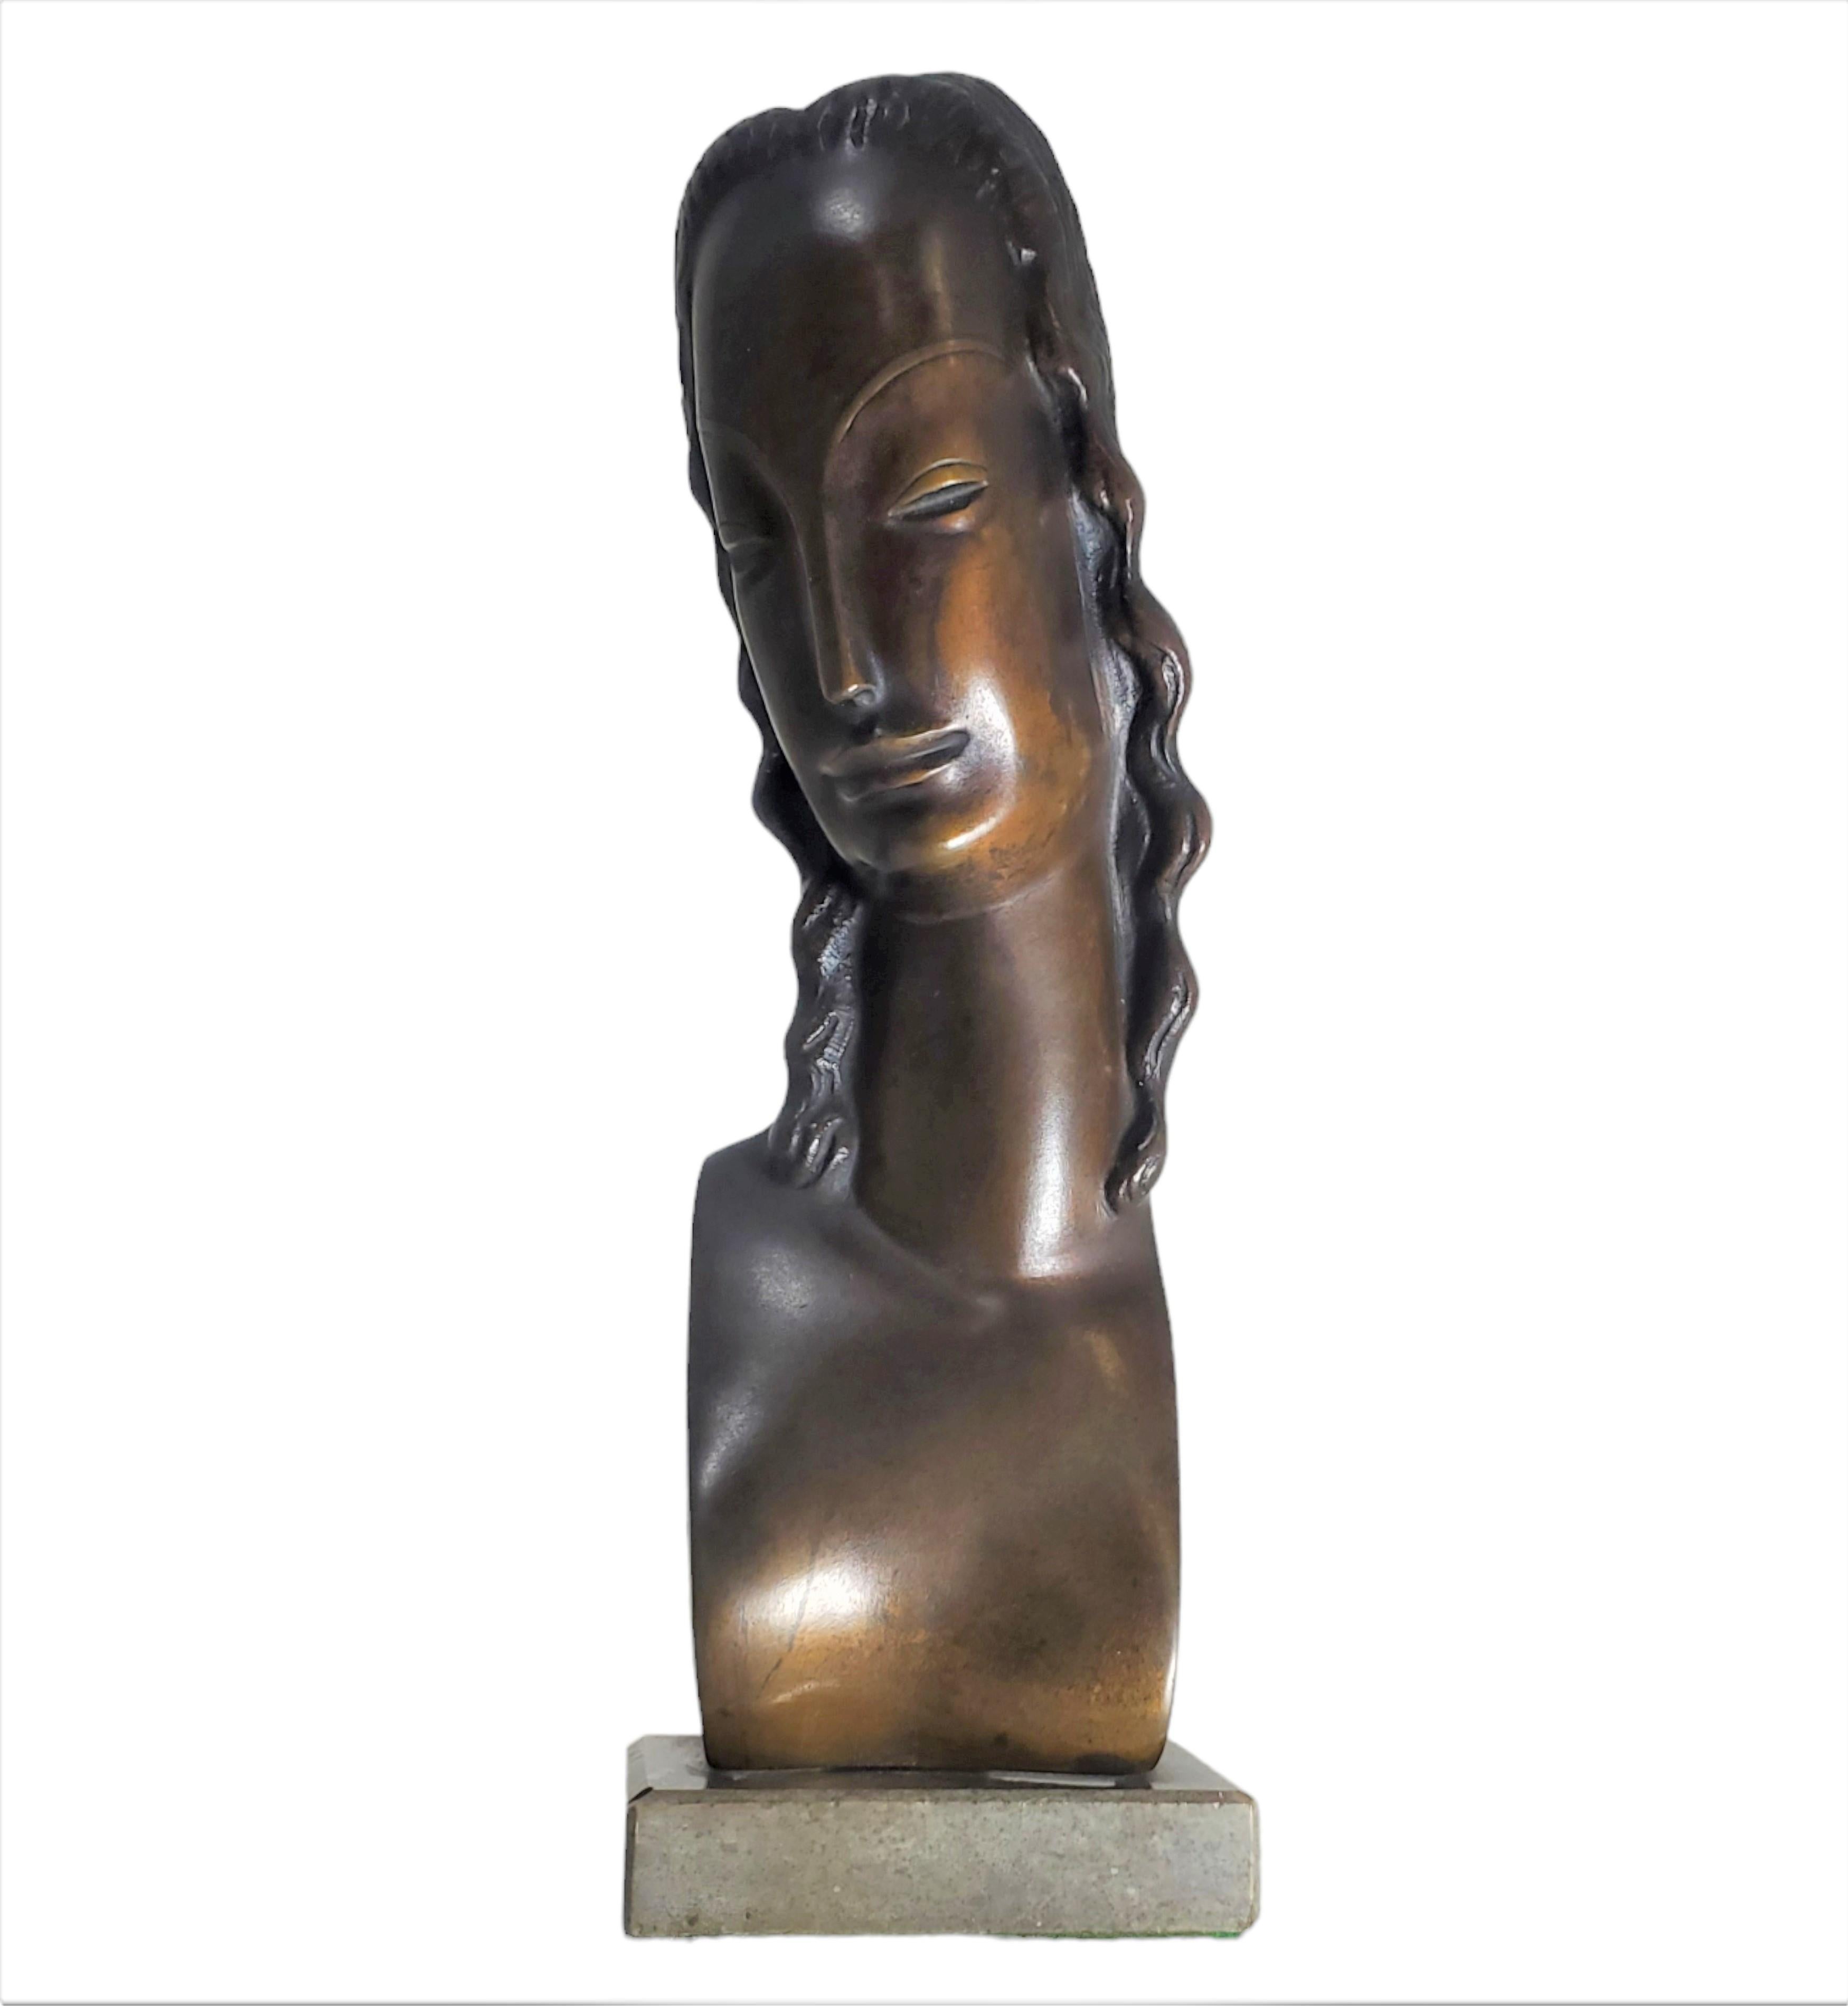 An exquisite original Art Deco period, stylized bronze sculpture of a woman with wavy hair in a medium brown patina. The stamped signature and the date 